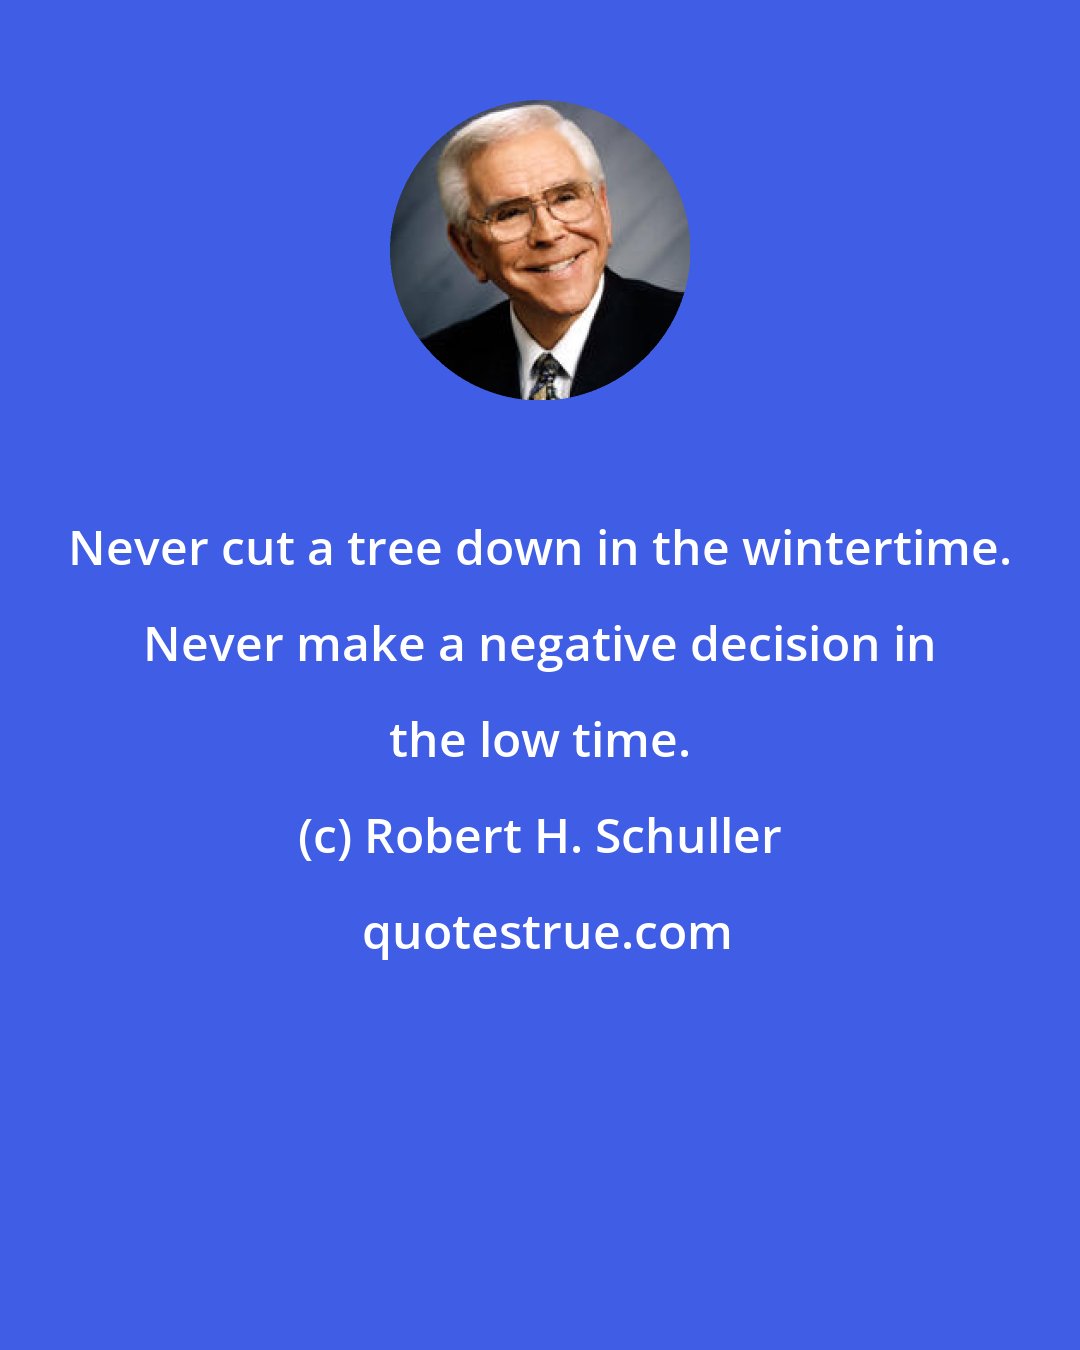 Robert H. Schuller: Never cut a tree down in the wintertime. Never make a negative decision in the low time.